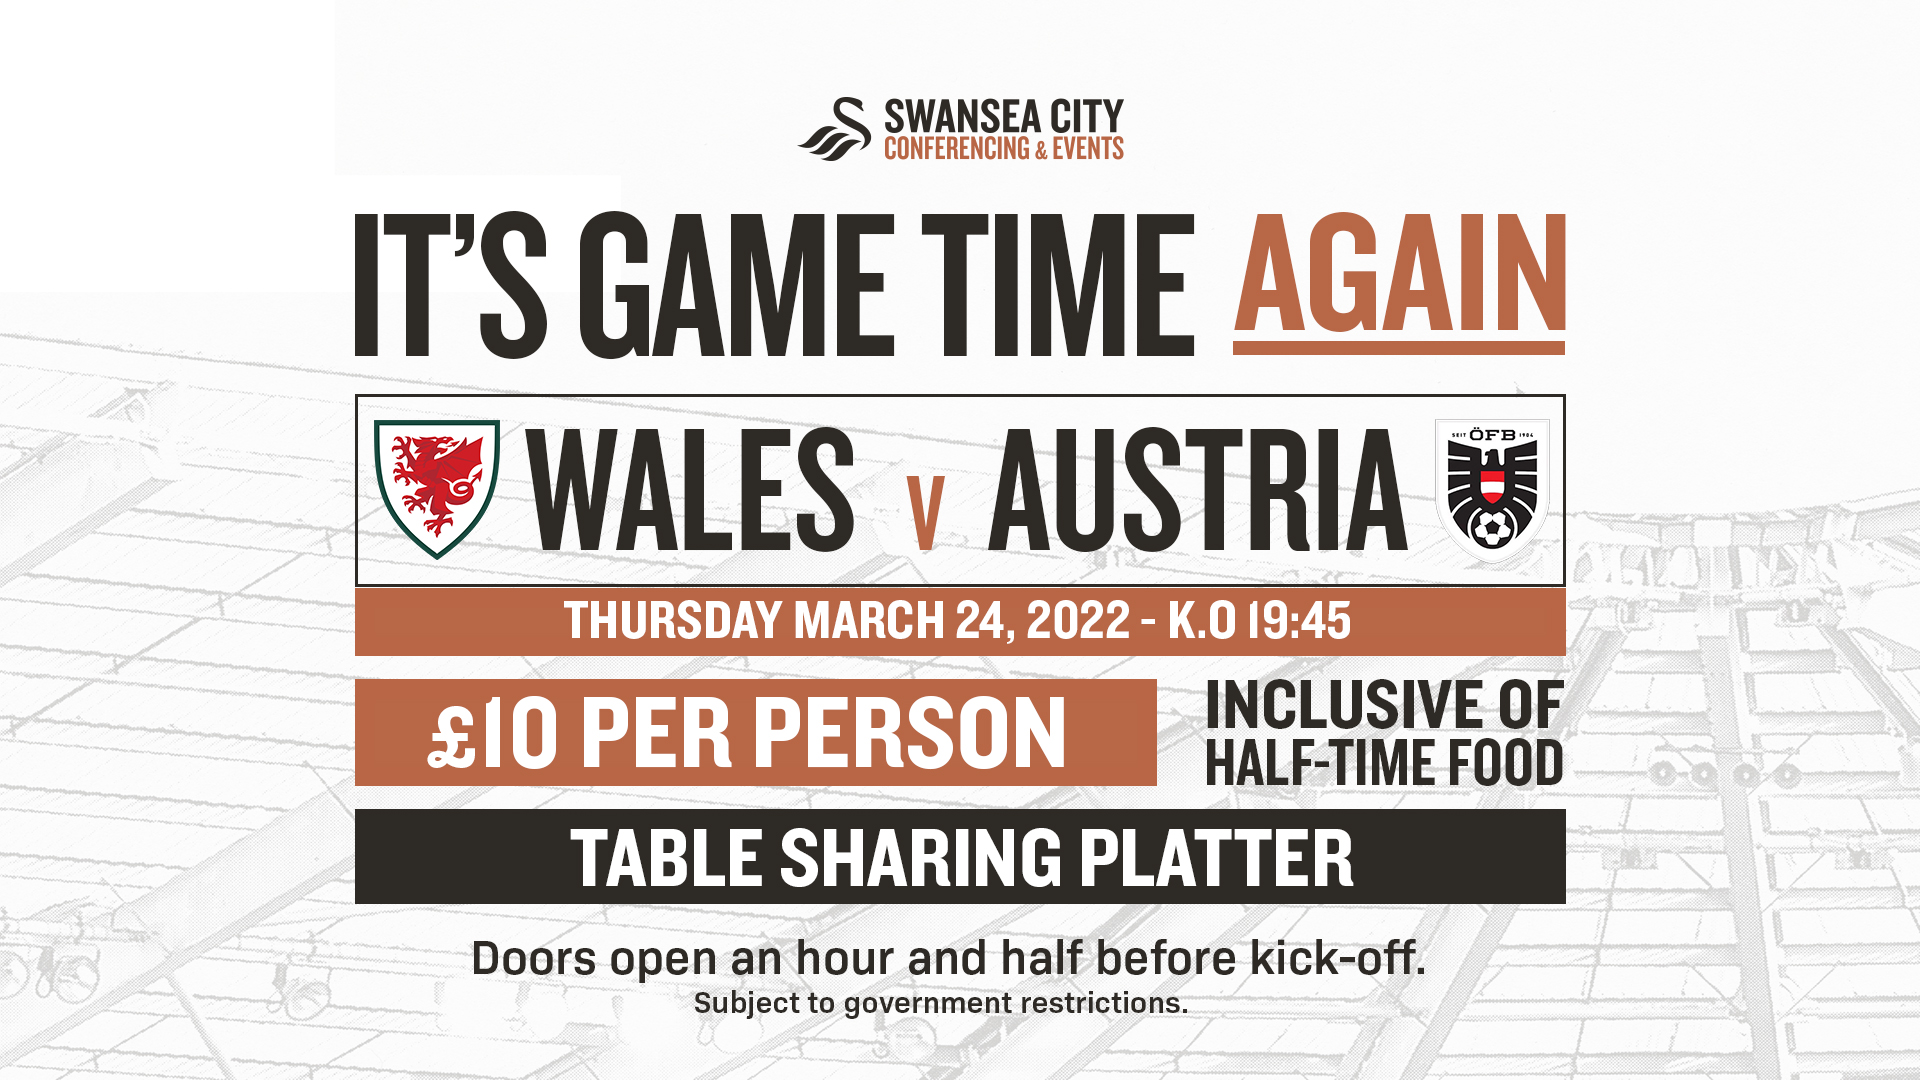 It's game time - Wales v Austria poster announcement